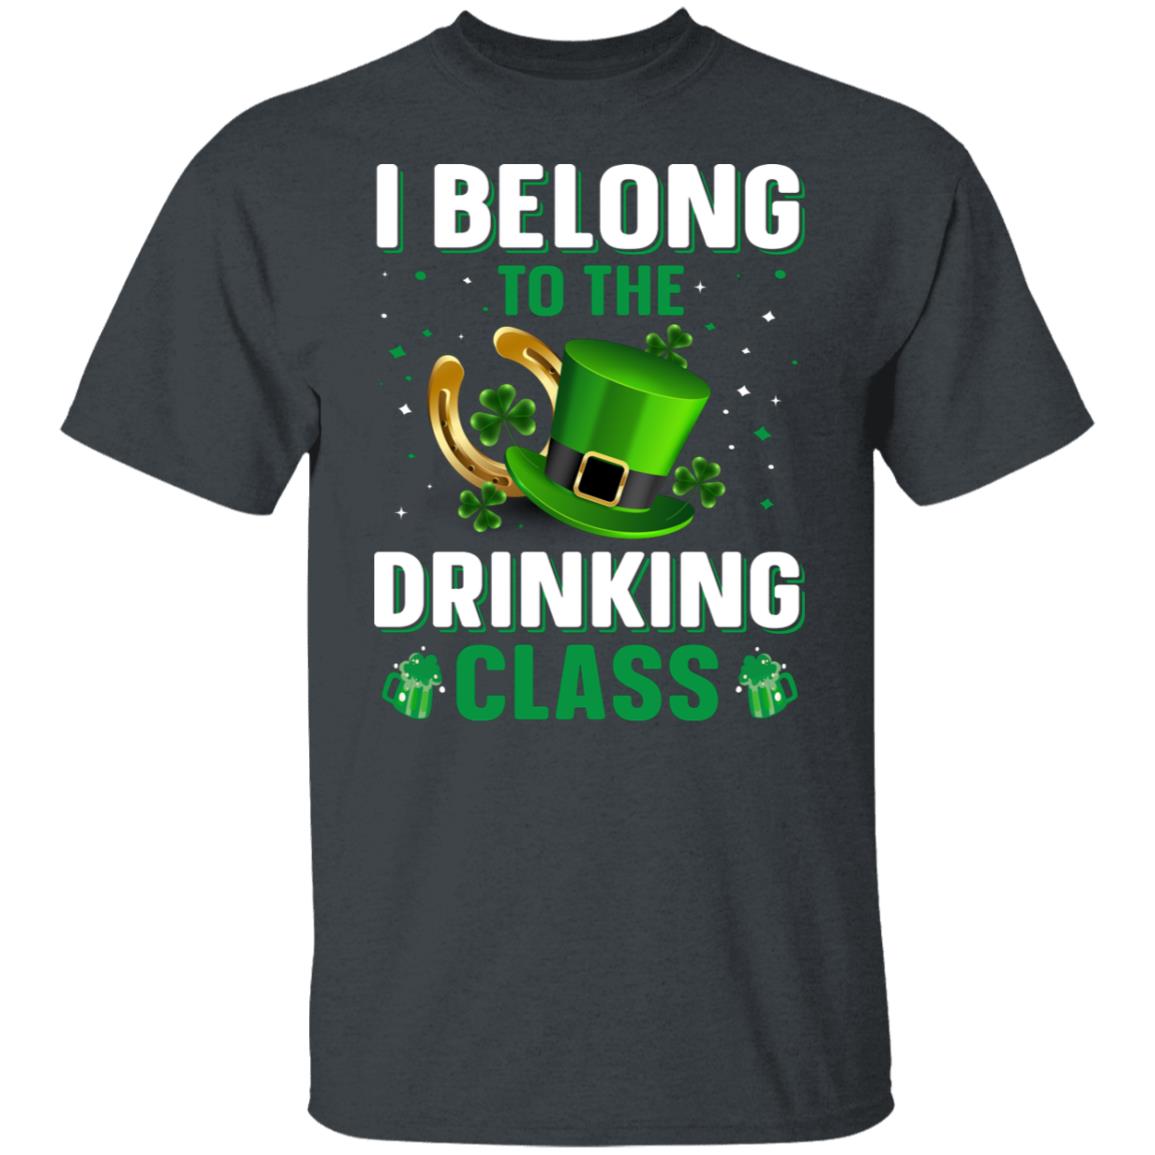 I Belong to The Drinking Class Funny Drinking Shirt